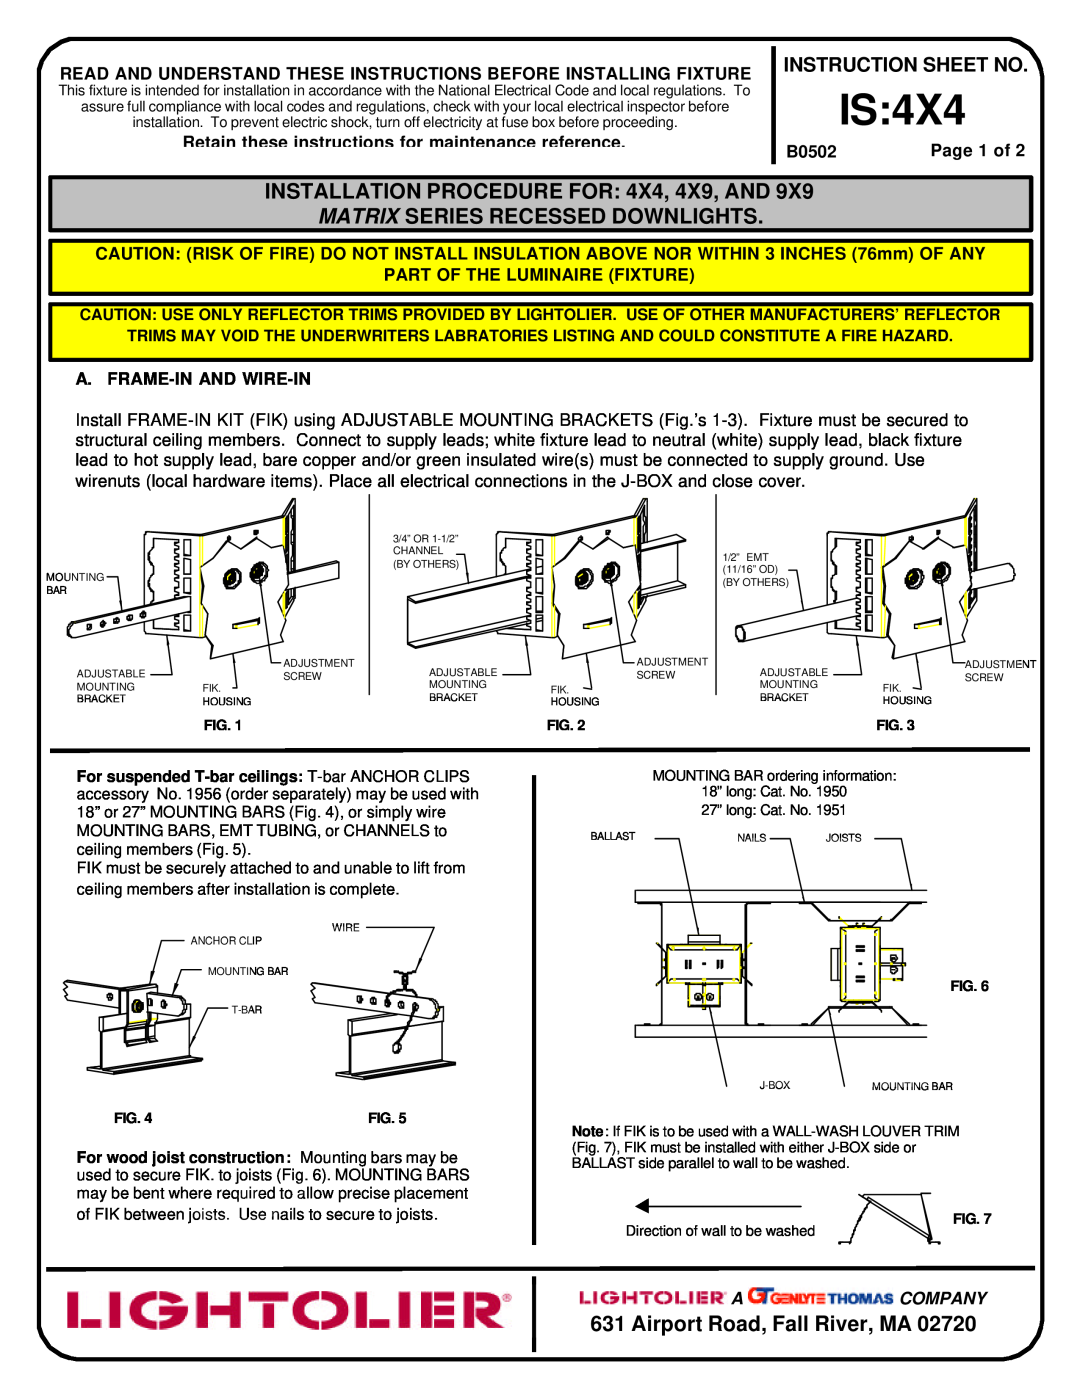 Lightolier IS:4X4 instruction sheet Is, INSTALLATION PROCEDURE FOR 4X4, 4X9, AND, Matrix Series Recessed Downlights, B0502 